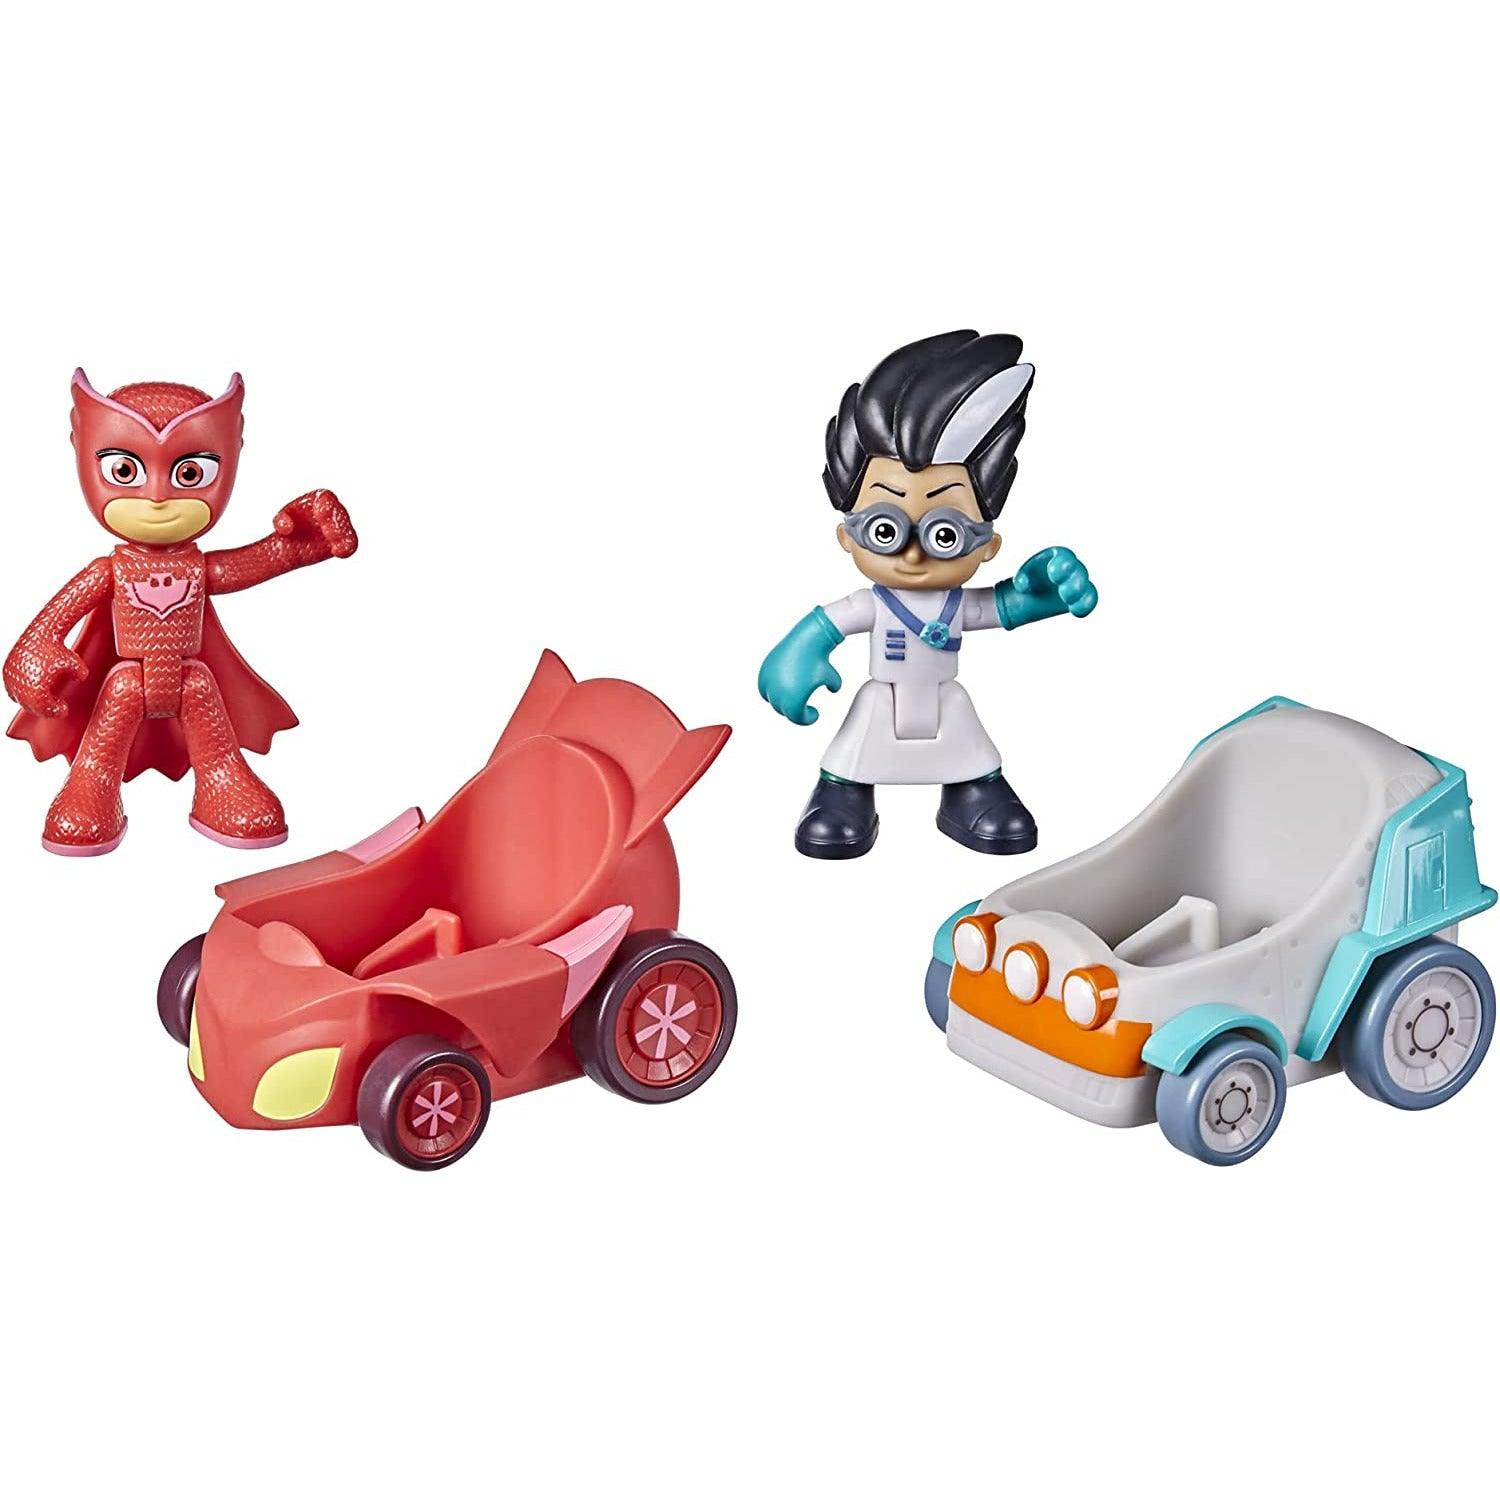 PJ Masks Owlette vs Romeo Battle Racers Preschool Toy, Vehicle and Action Figure Set for Kids Ages 3 and Up - BumbleToys - 5-7 Years, Action Battling, Boys, Catboy, Eagle Plus, Pj Masks, Preschool Toy